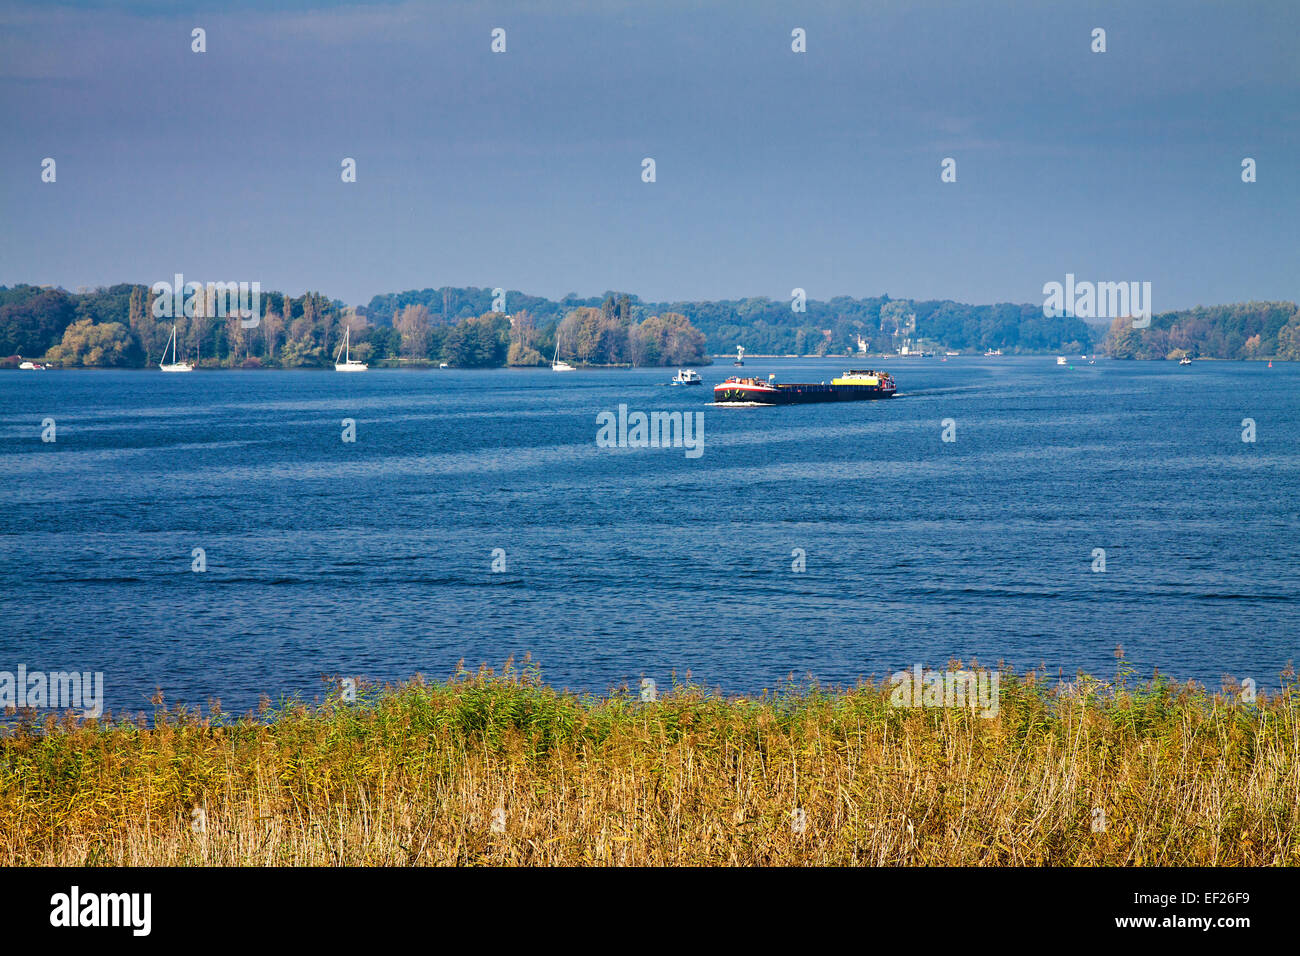 A ship on the river Havel in Germany. Stock Photo